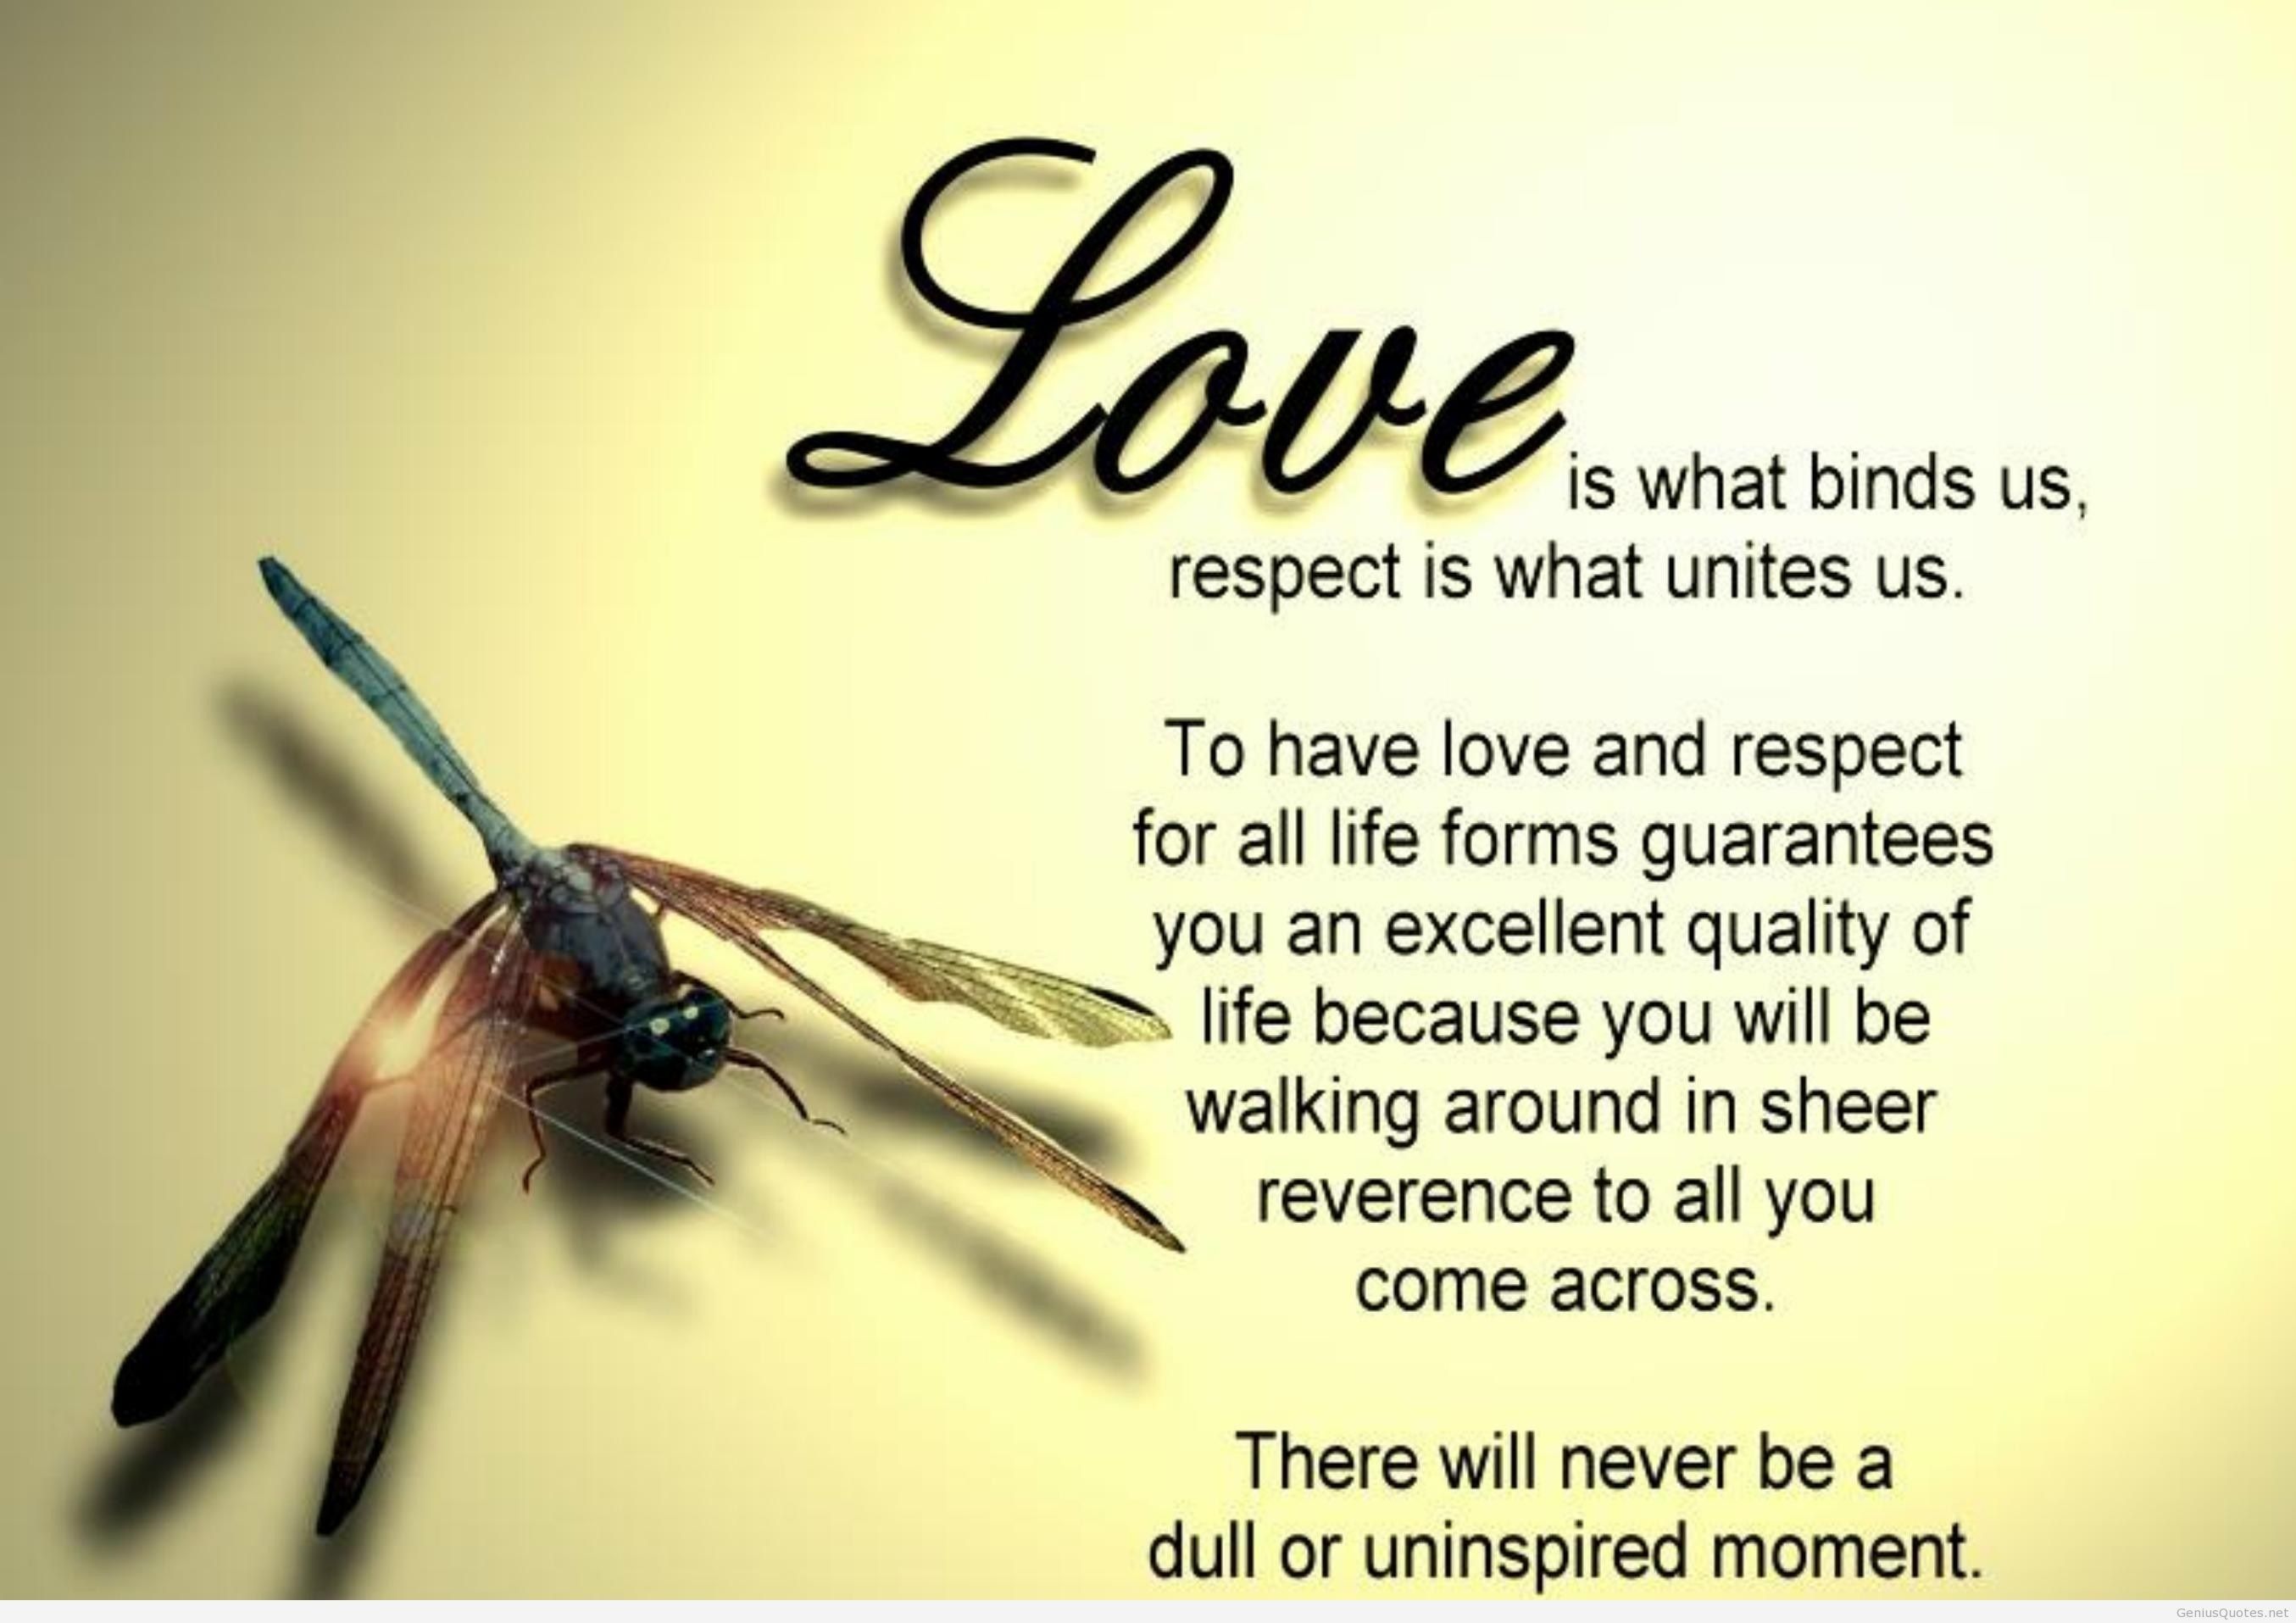 Romantic Love Quotes Wallpapers on WallpaperDog